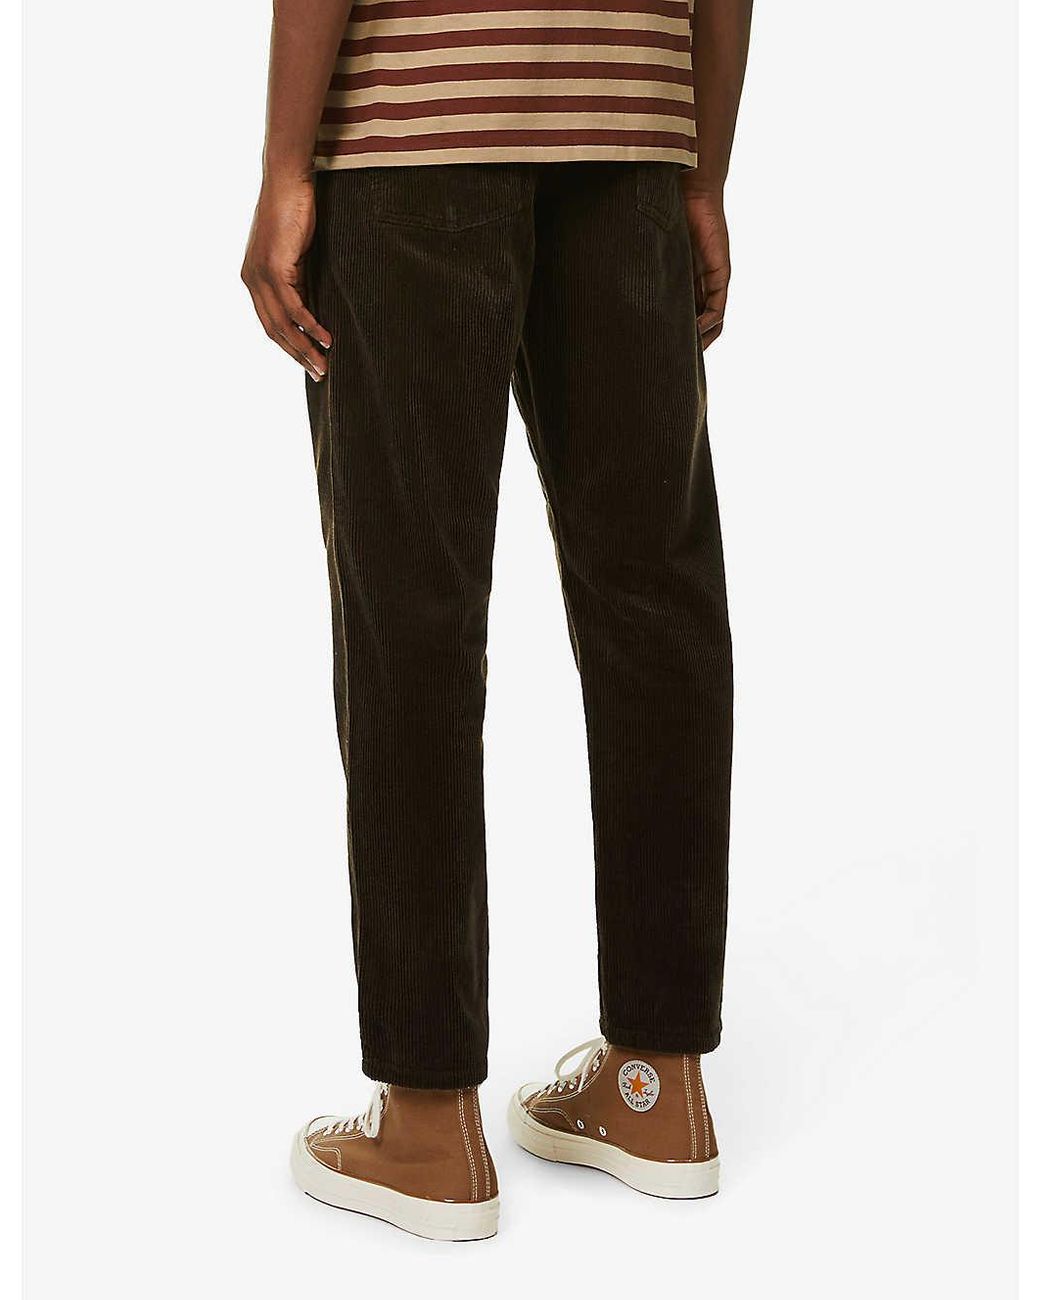 Carhartt WIP Newel Relaxed-fit Tapered Cotton-corduroy Trousers in Tobacco  (Brown) for Men - Lyst